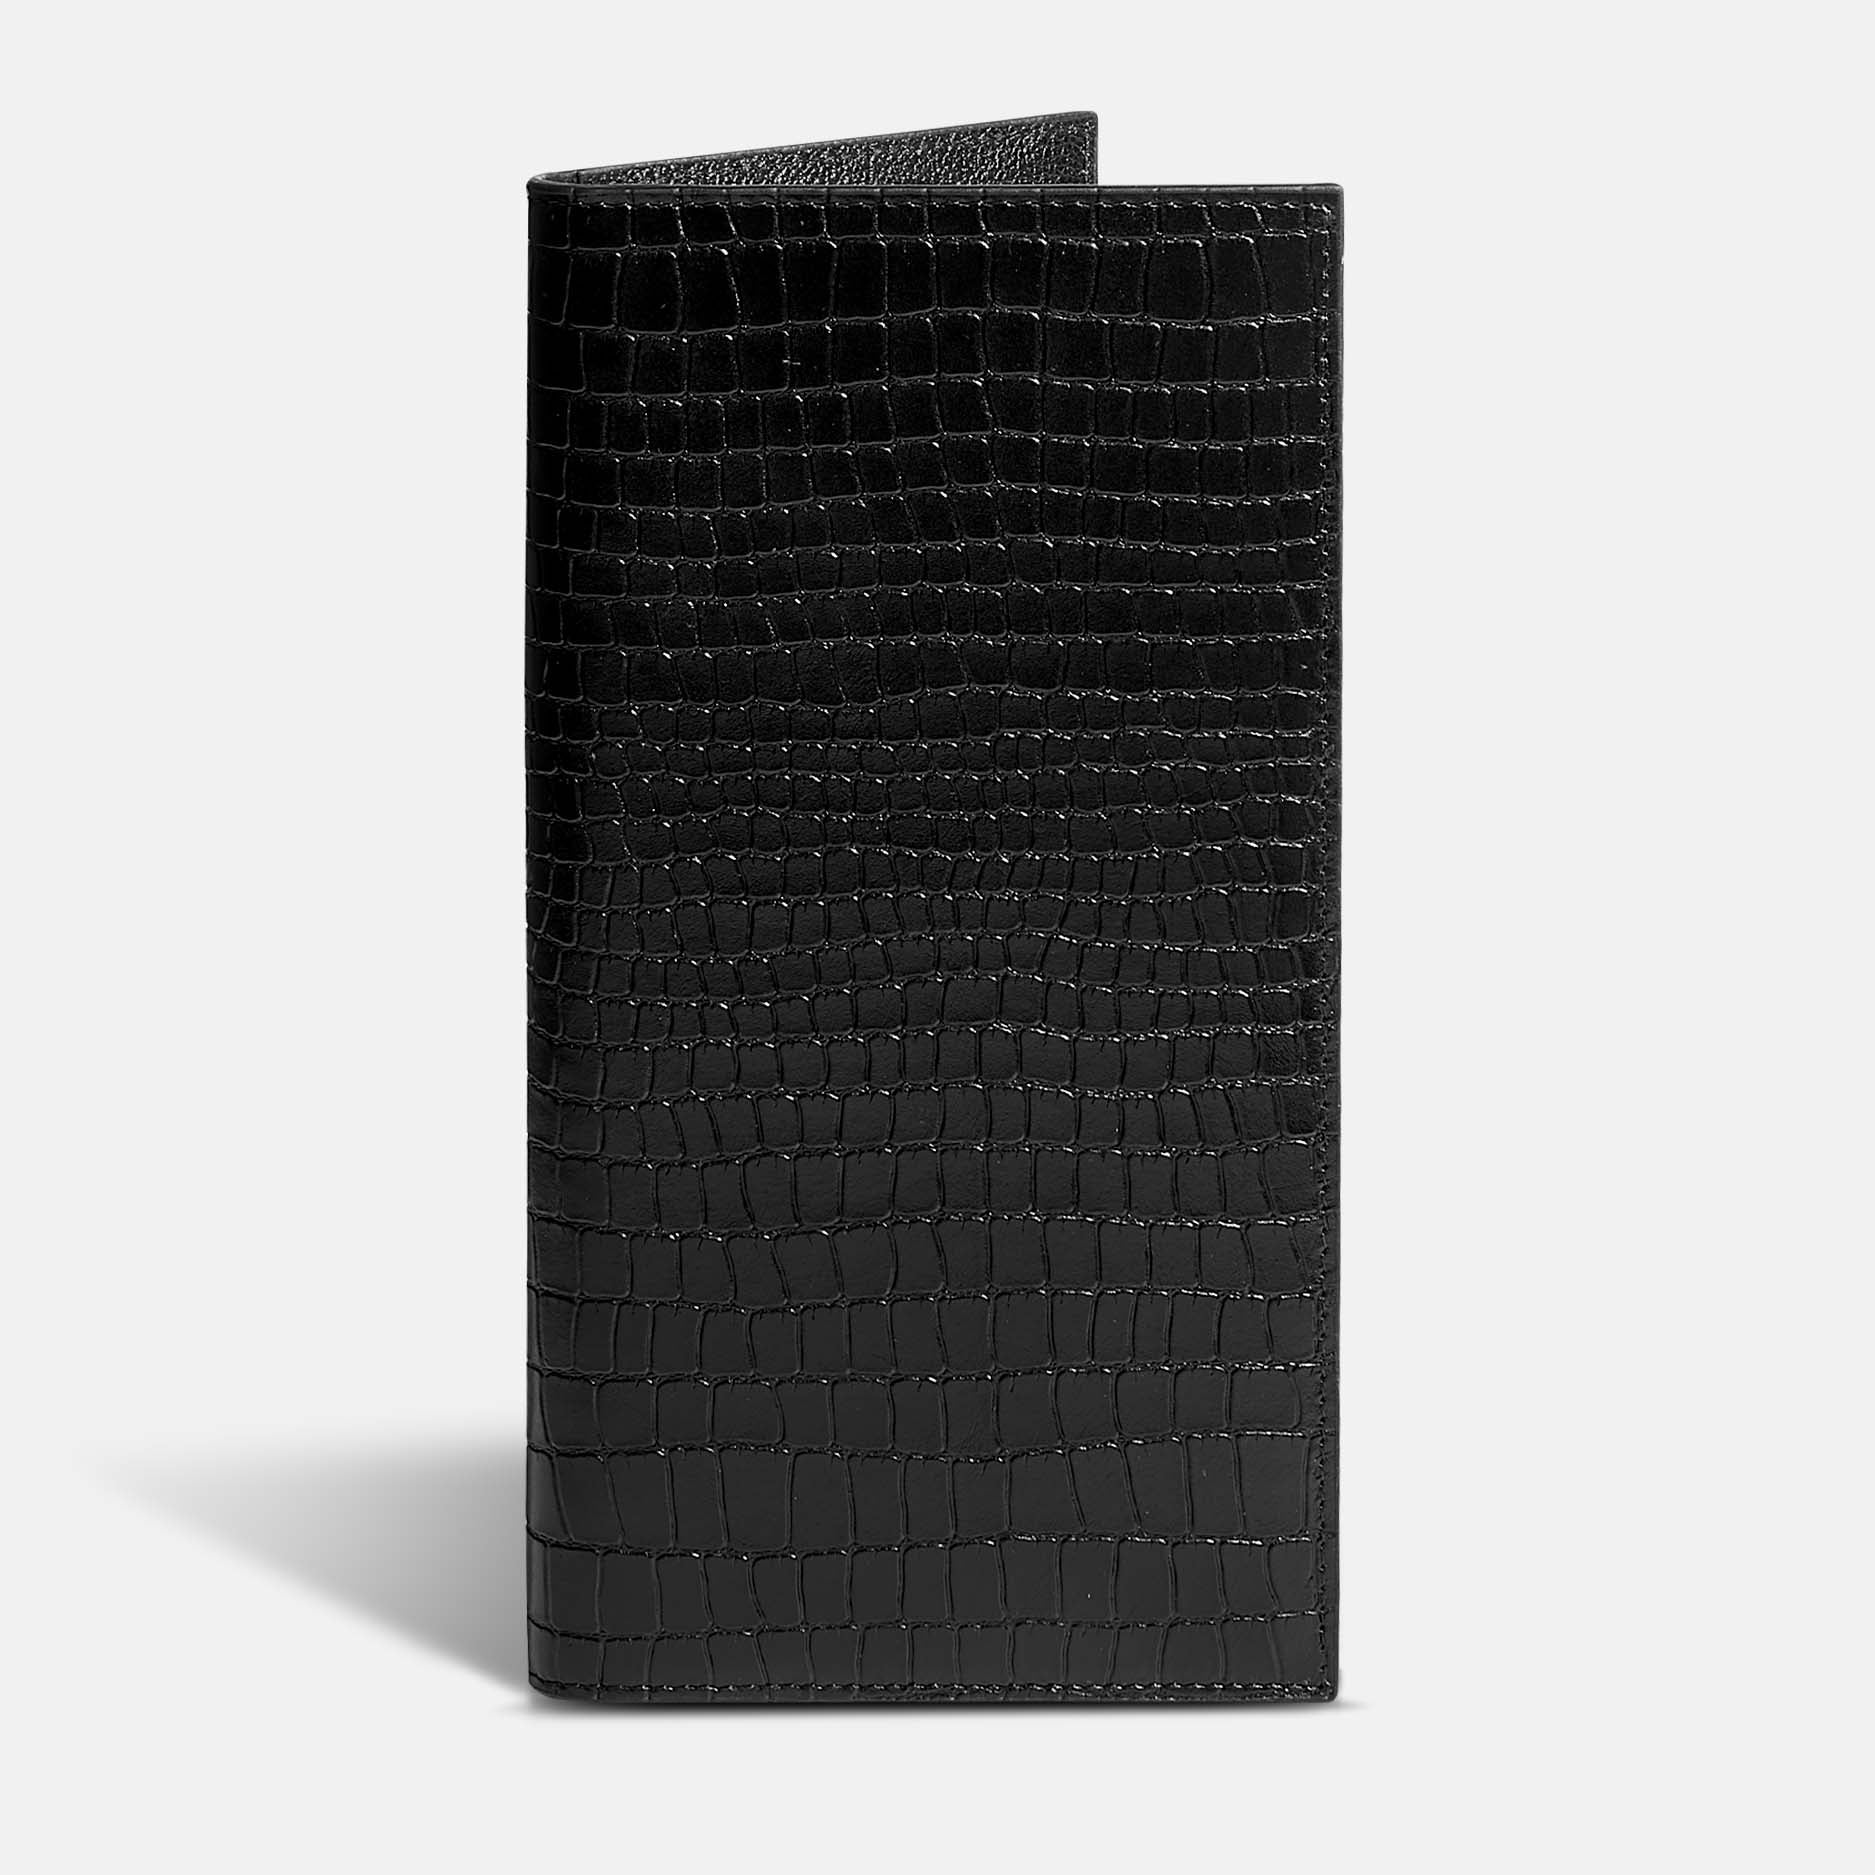 Family Case for 5 Passports - Midnight Black